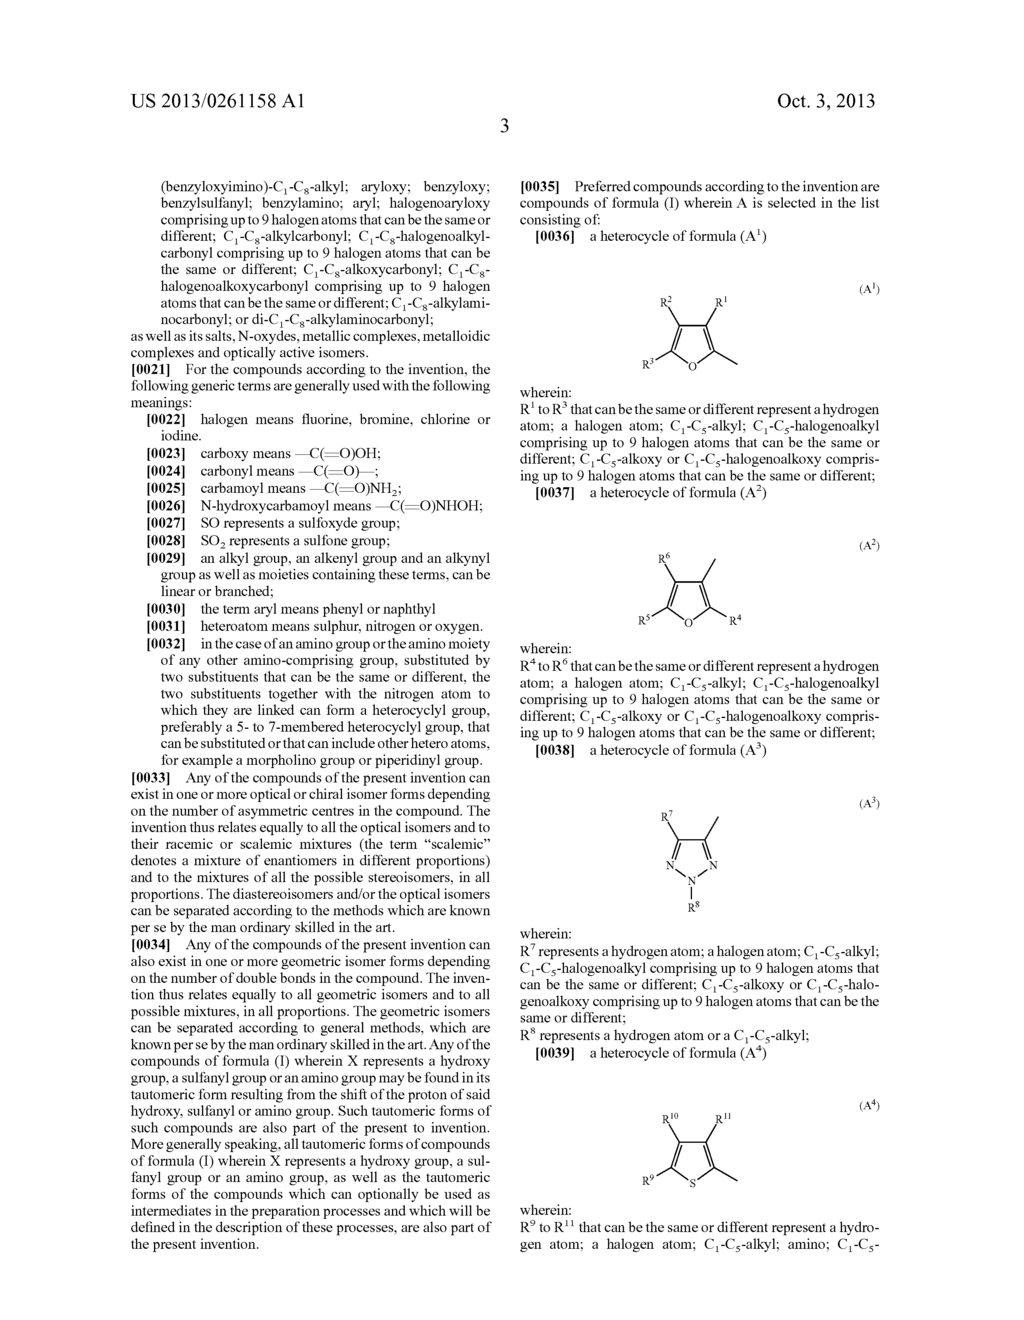 FUNGICIDAL N-(2-PHENOXYETHYL)CARBOXAMIDE DERIVATIVES AND THEIR AZA, THIA     AND SILA ANALOGUES - diagram, schematic, and image 04